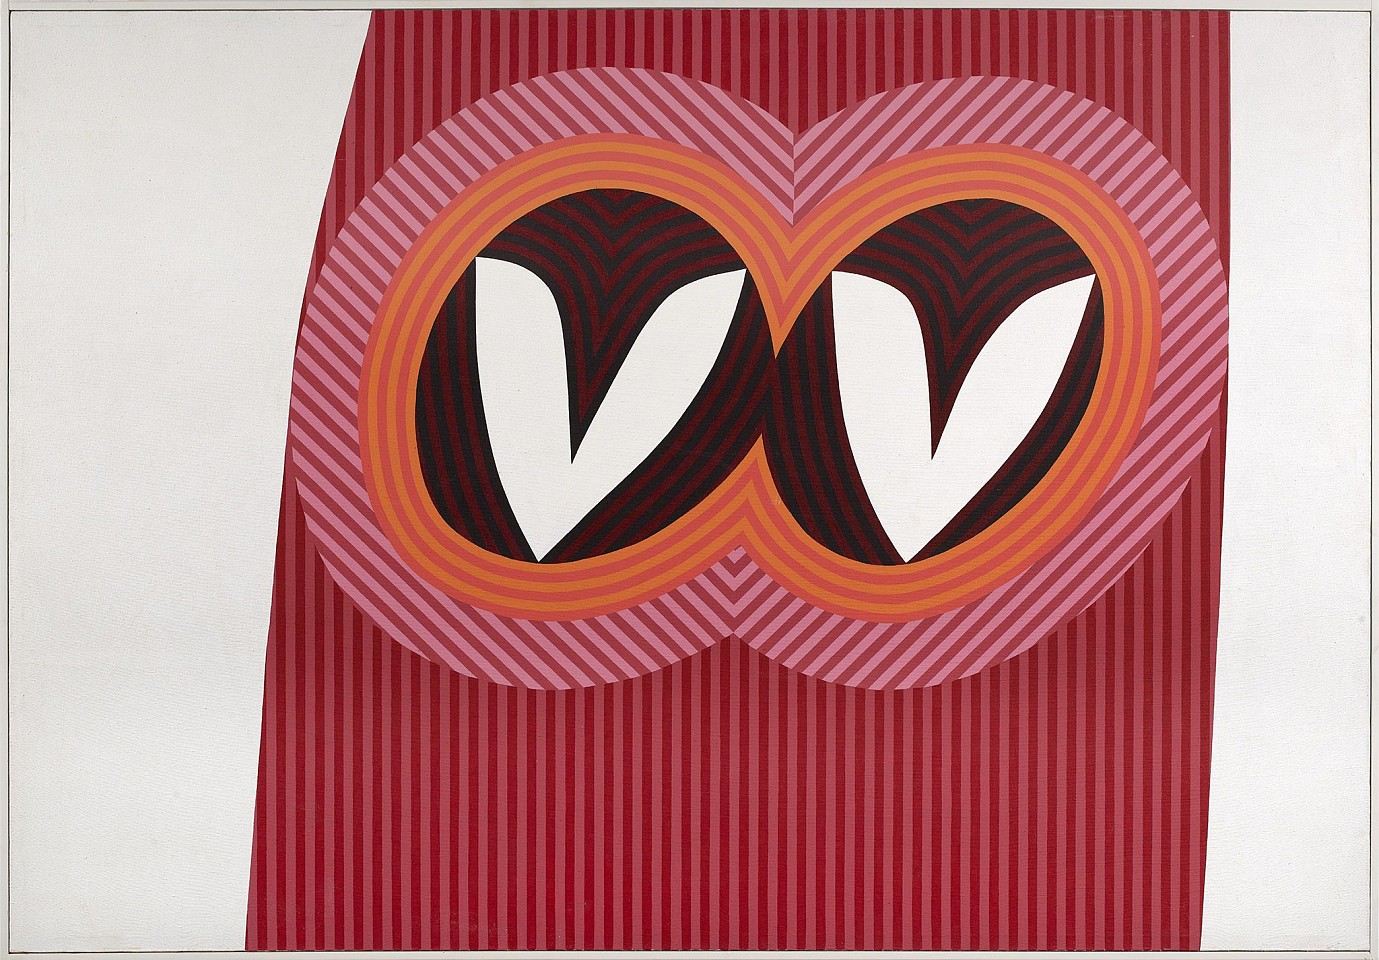 Mary Dill Henry, Love Jazz, 1965
Acrylic on canvas, 49 3/4 x 71 1/4 in. (126.4 x 181 cm)
MHEN-00116